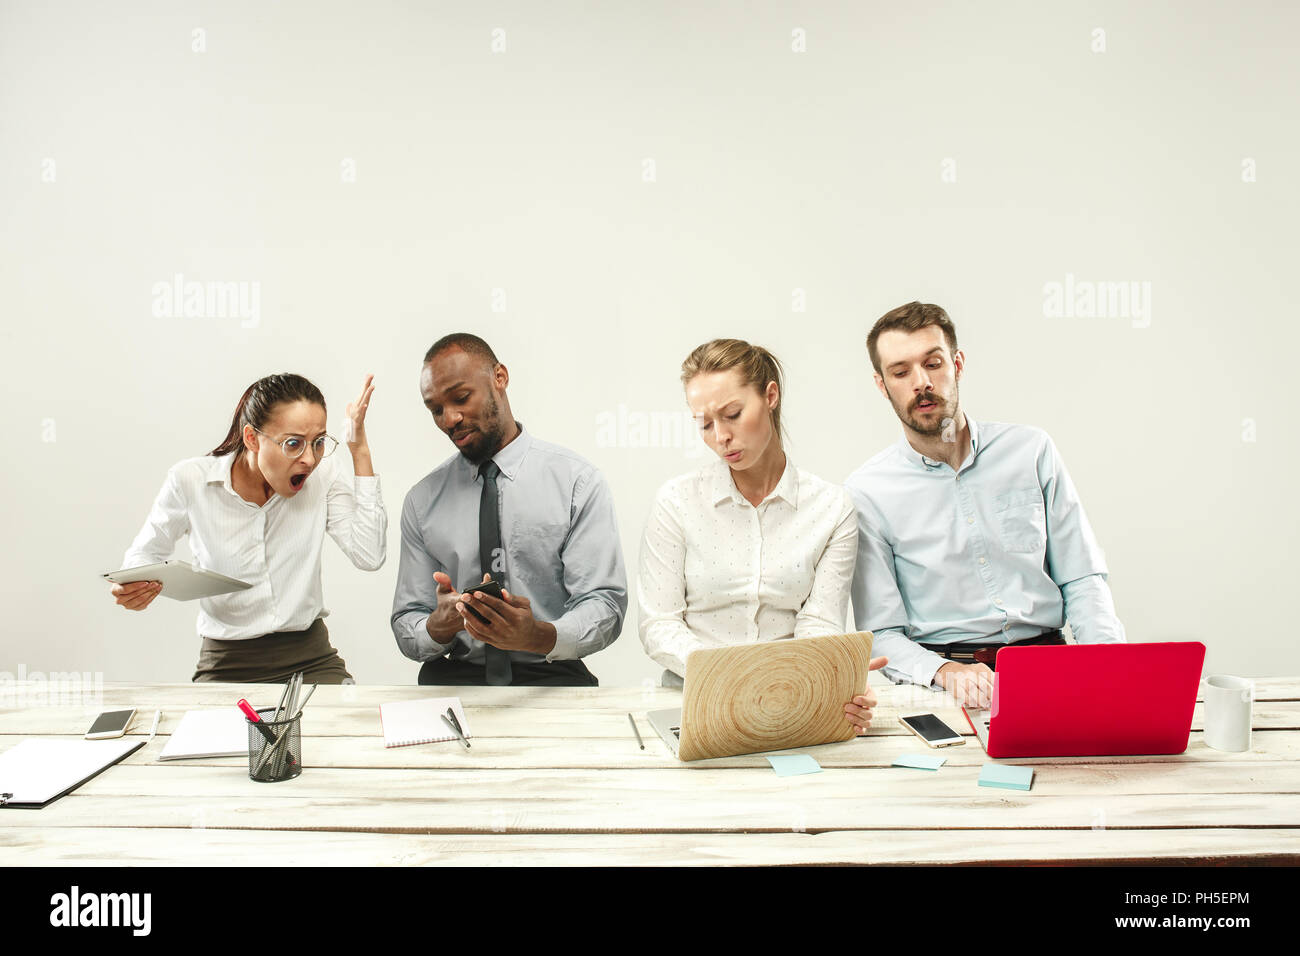 Young african and caucasian men and women sitting at office and working on laptops. The business, emotions, team, teamwork, workplace, leadership, meeting concept. different emotions of colleagues Stock Photo